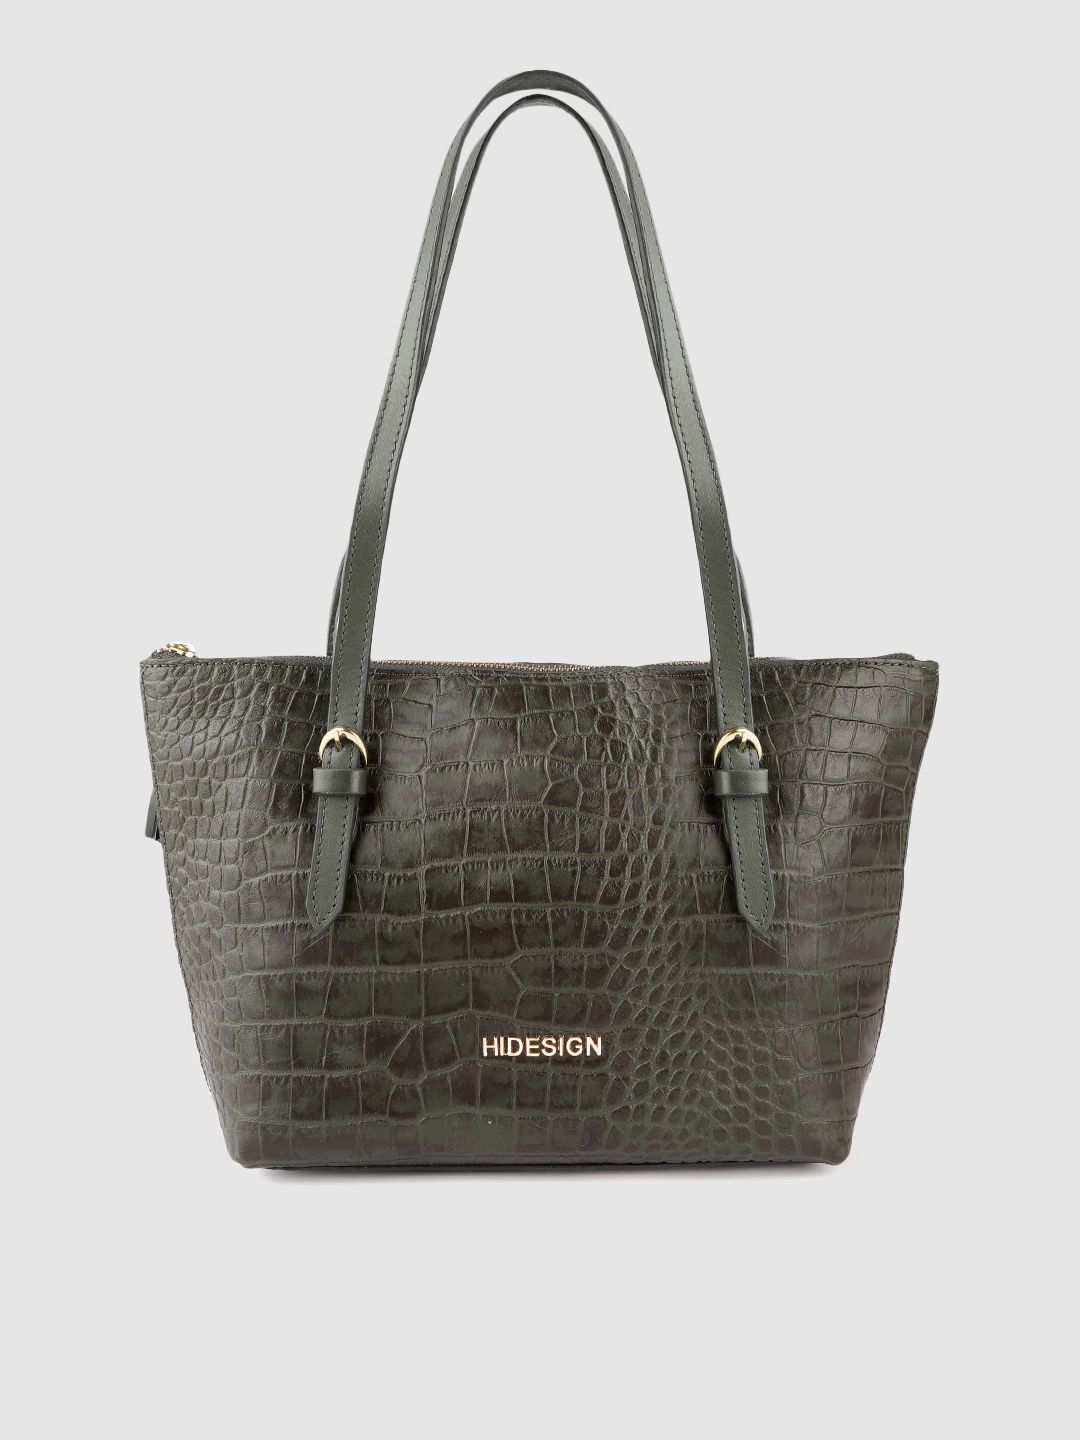 Hidesign Olive Green Croc Textured Leather Structured Shoulder Bag Price in India